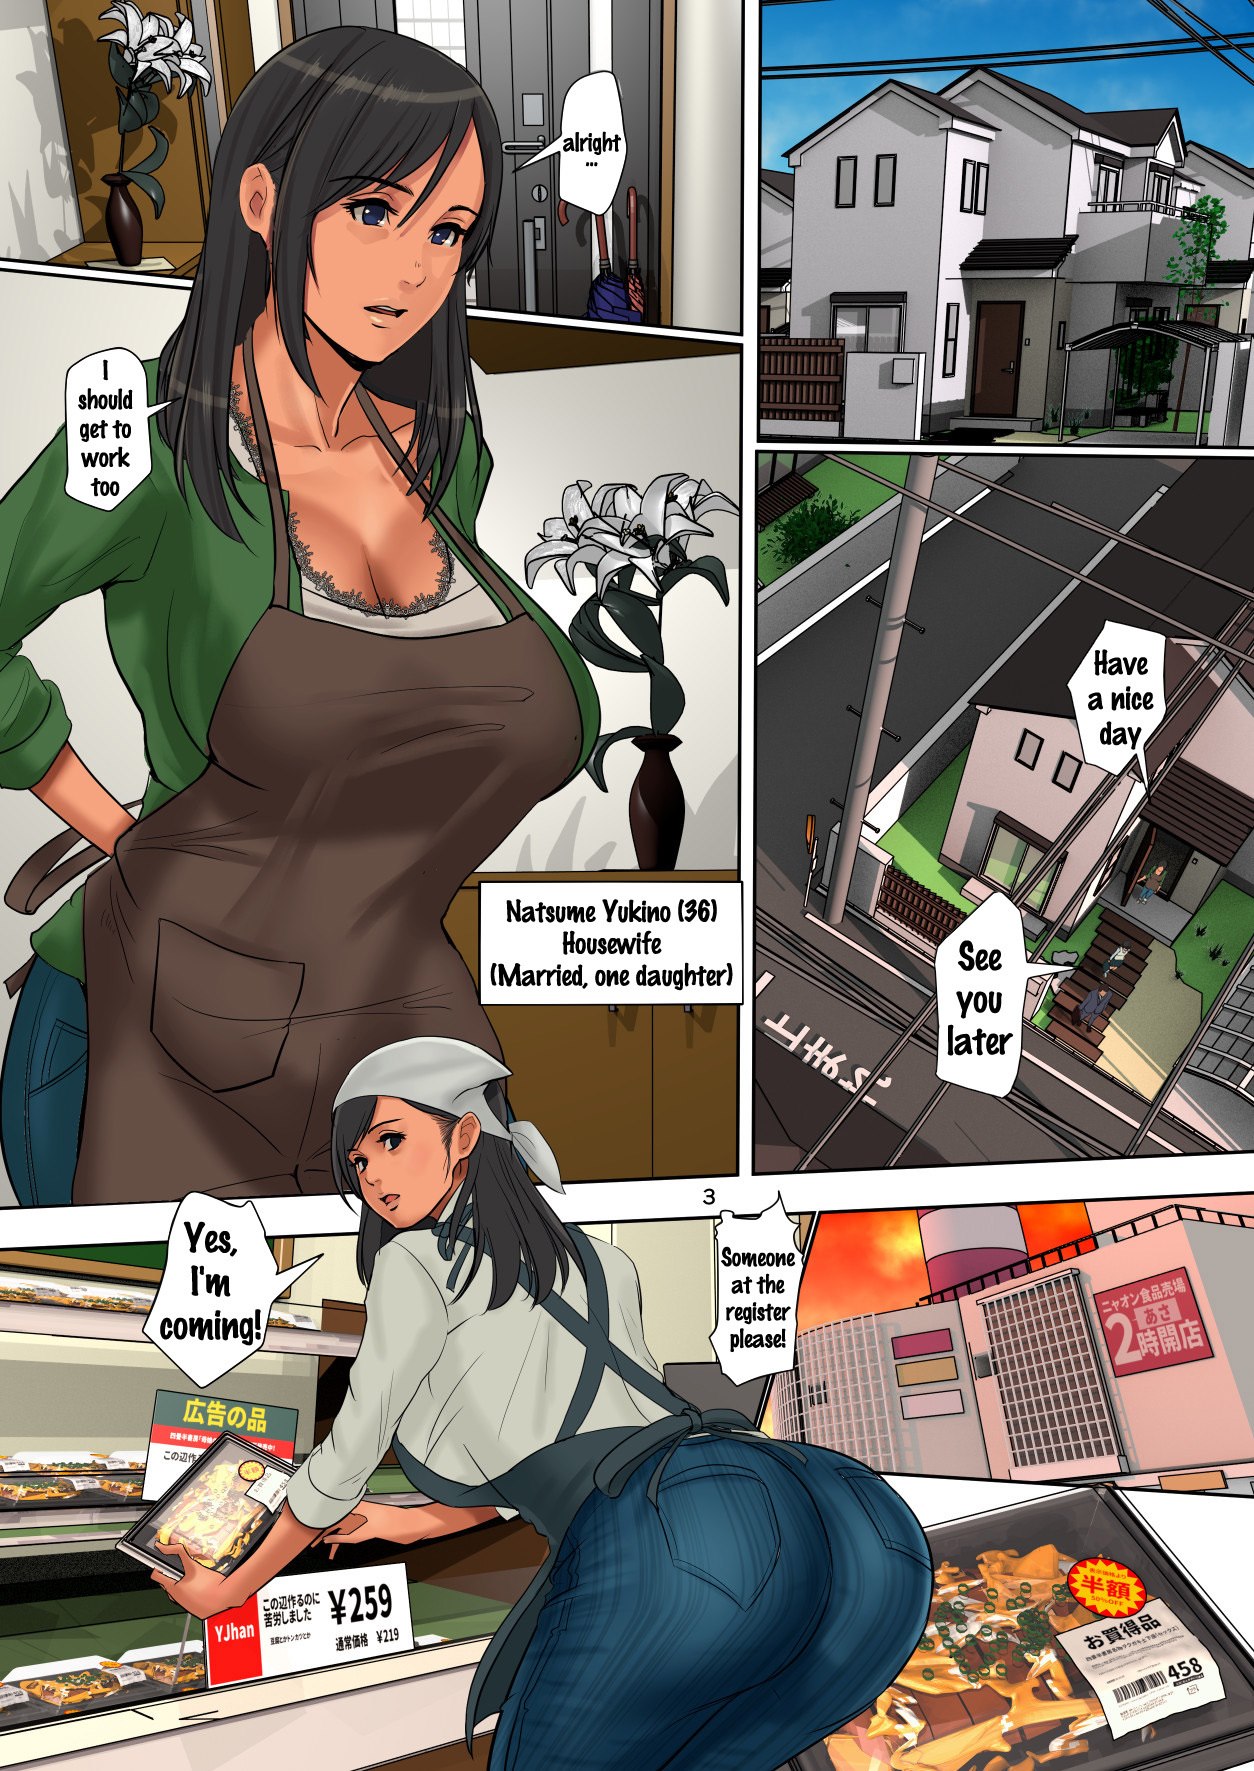 Busty MILF Blackmailed For Money - Yojouhan Shobou Â» Porn Comics Galleries